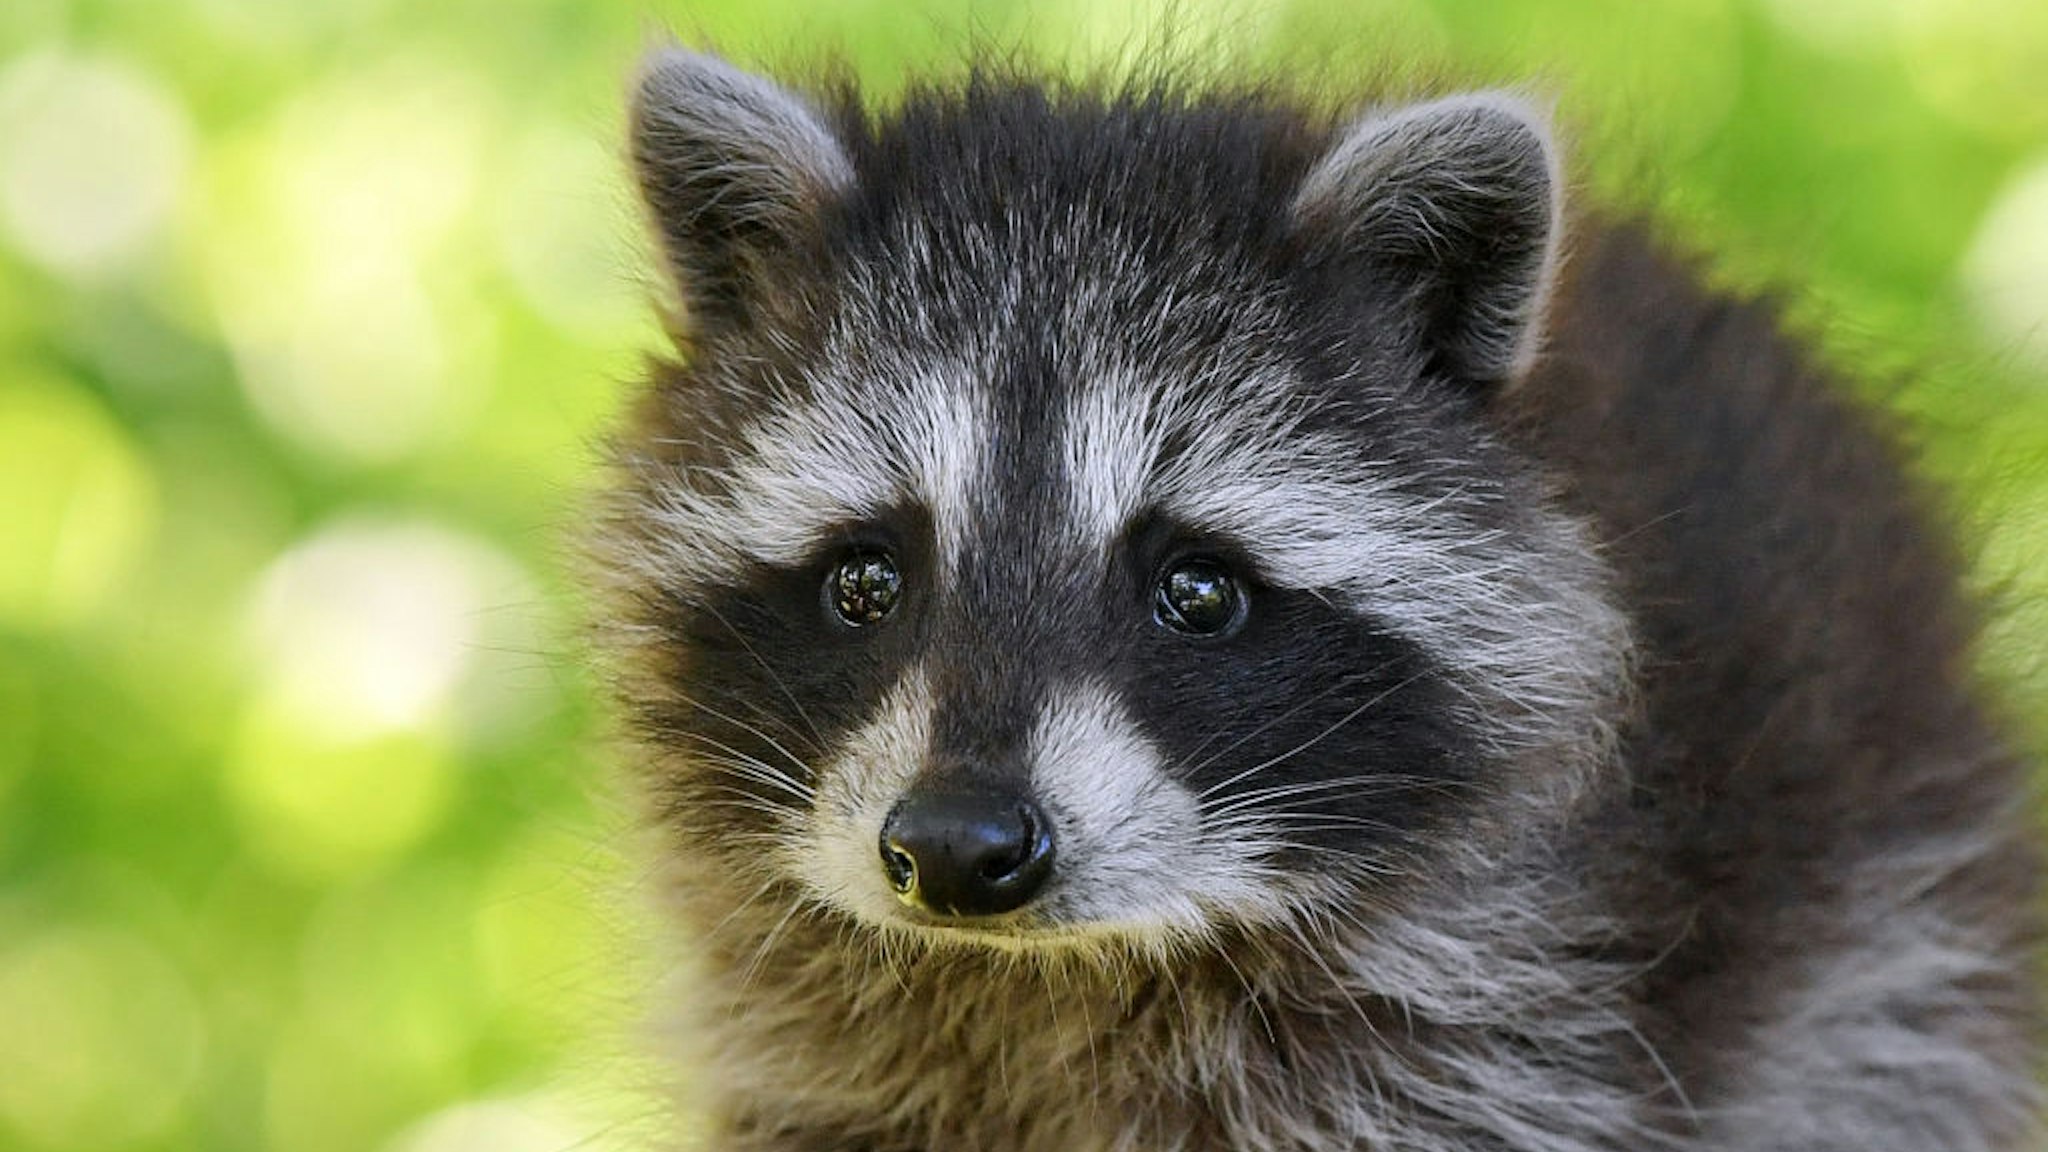 06 June 2019, Brandenburg, Sieversdorf: A young raccoon (Procyon lotor) explores a garden. Already for some days this small nocturnal journeyman strays over properties in the village. Photo: Patrick Pleul/dpa-Zentralbild/ZB (Photo by Patrick Pleul/picture alliance via Getty Images)